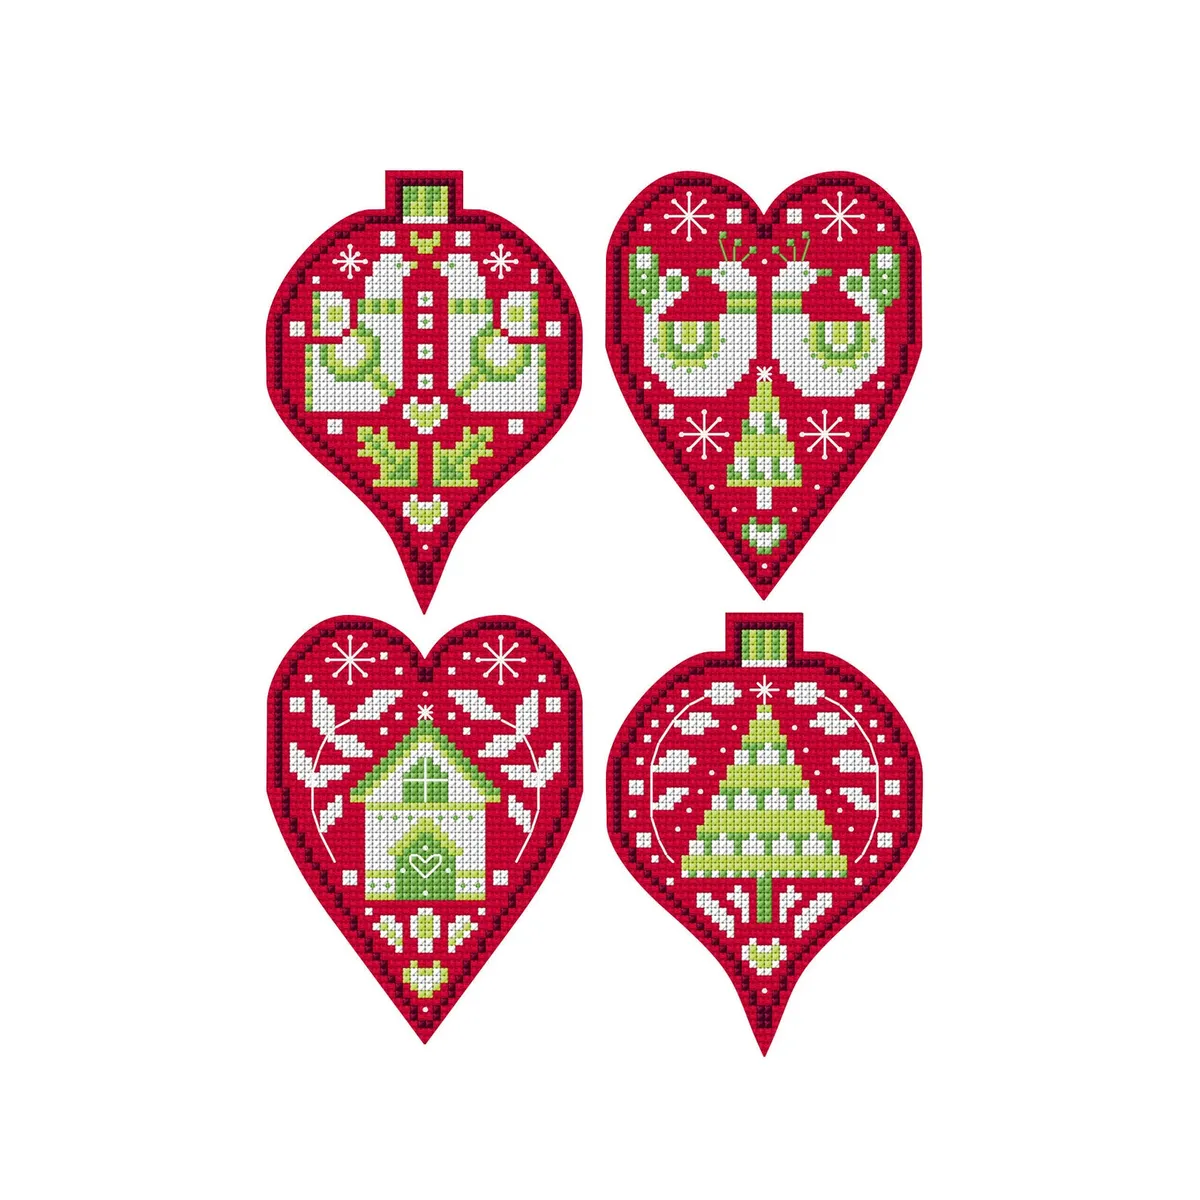 Product Details, Just Cross Stitch 'Ornaments' 2019, Books & Patterns